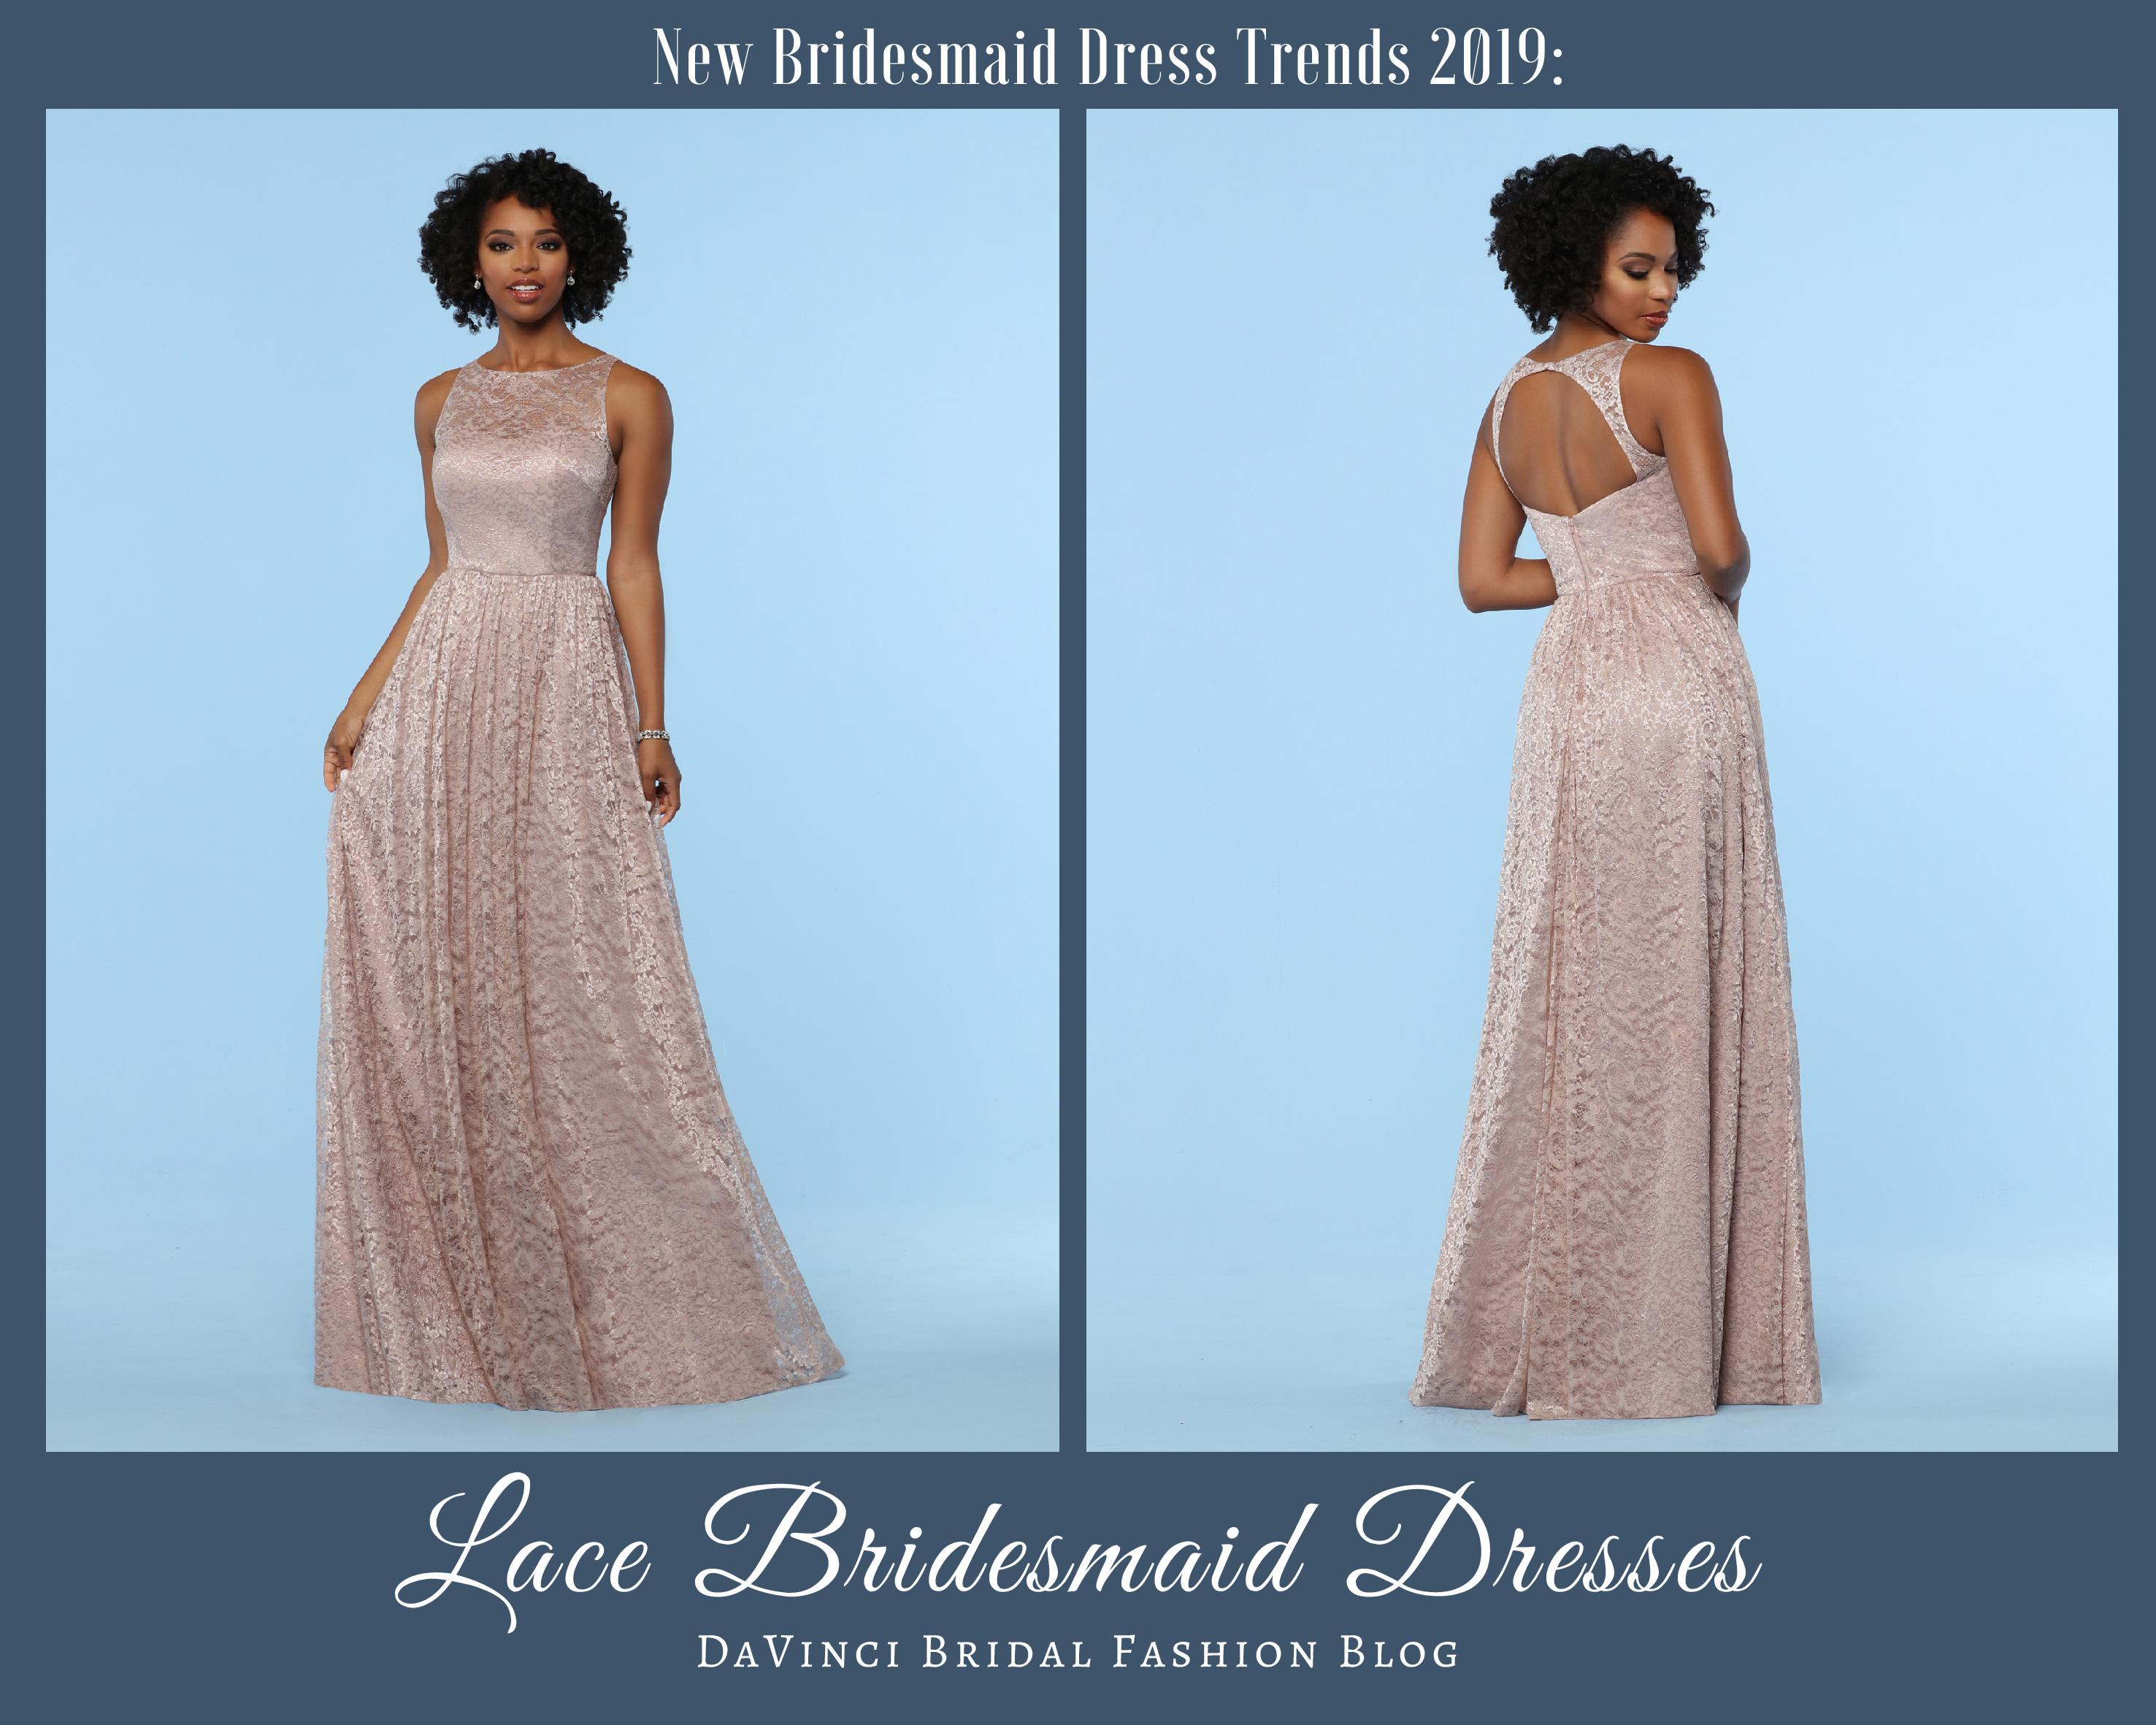 This is the Latest Bridal Dress Trend and We Love It - Wedded Wonderland